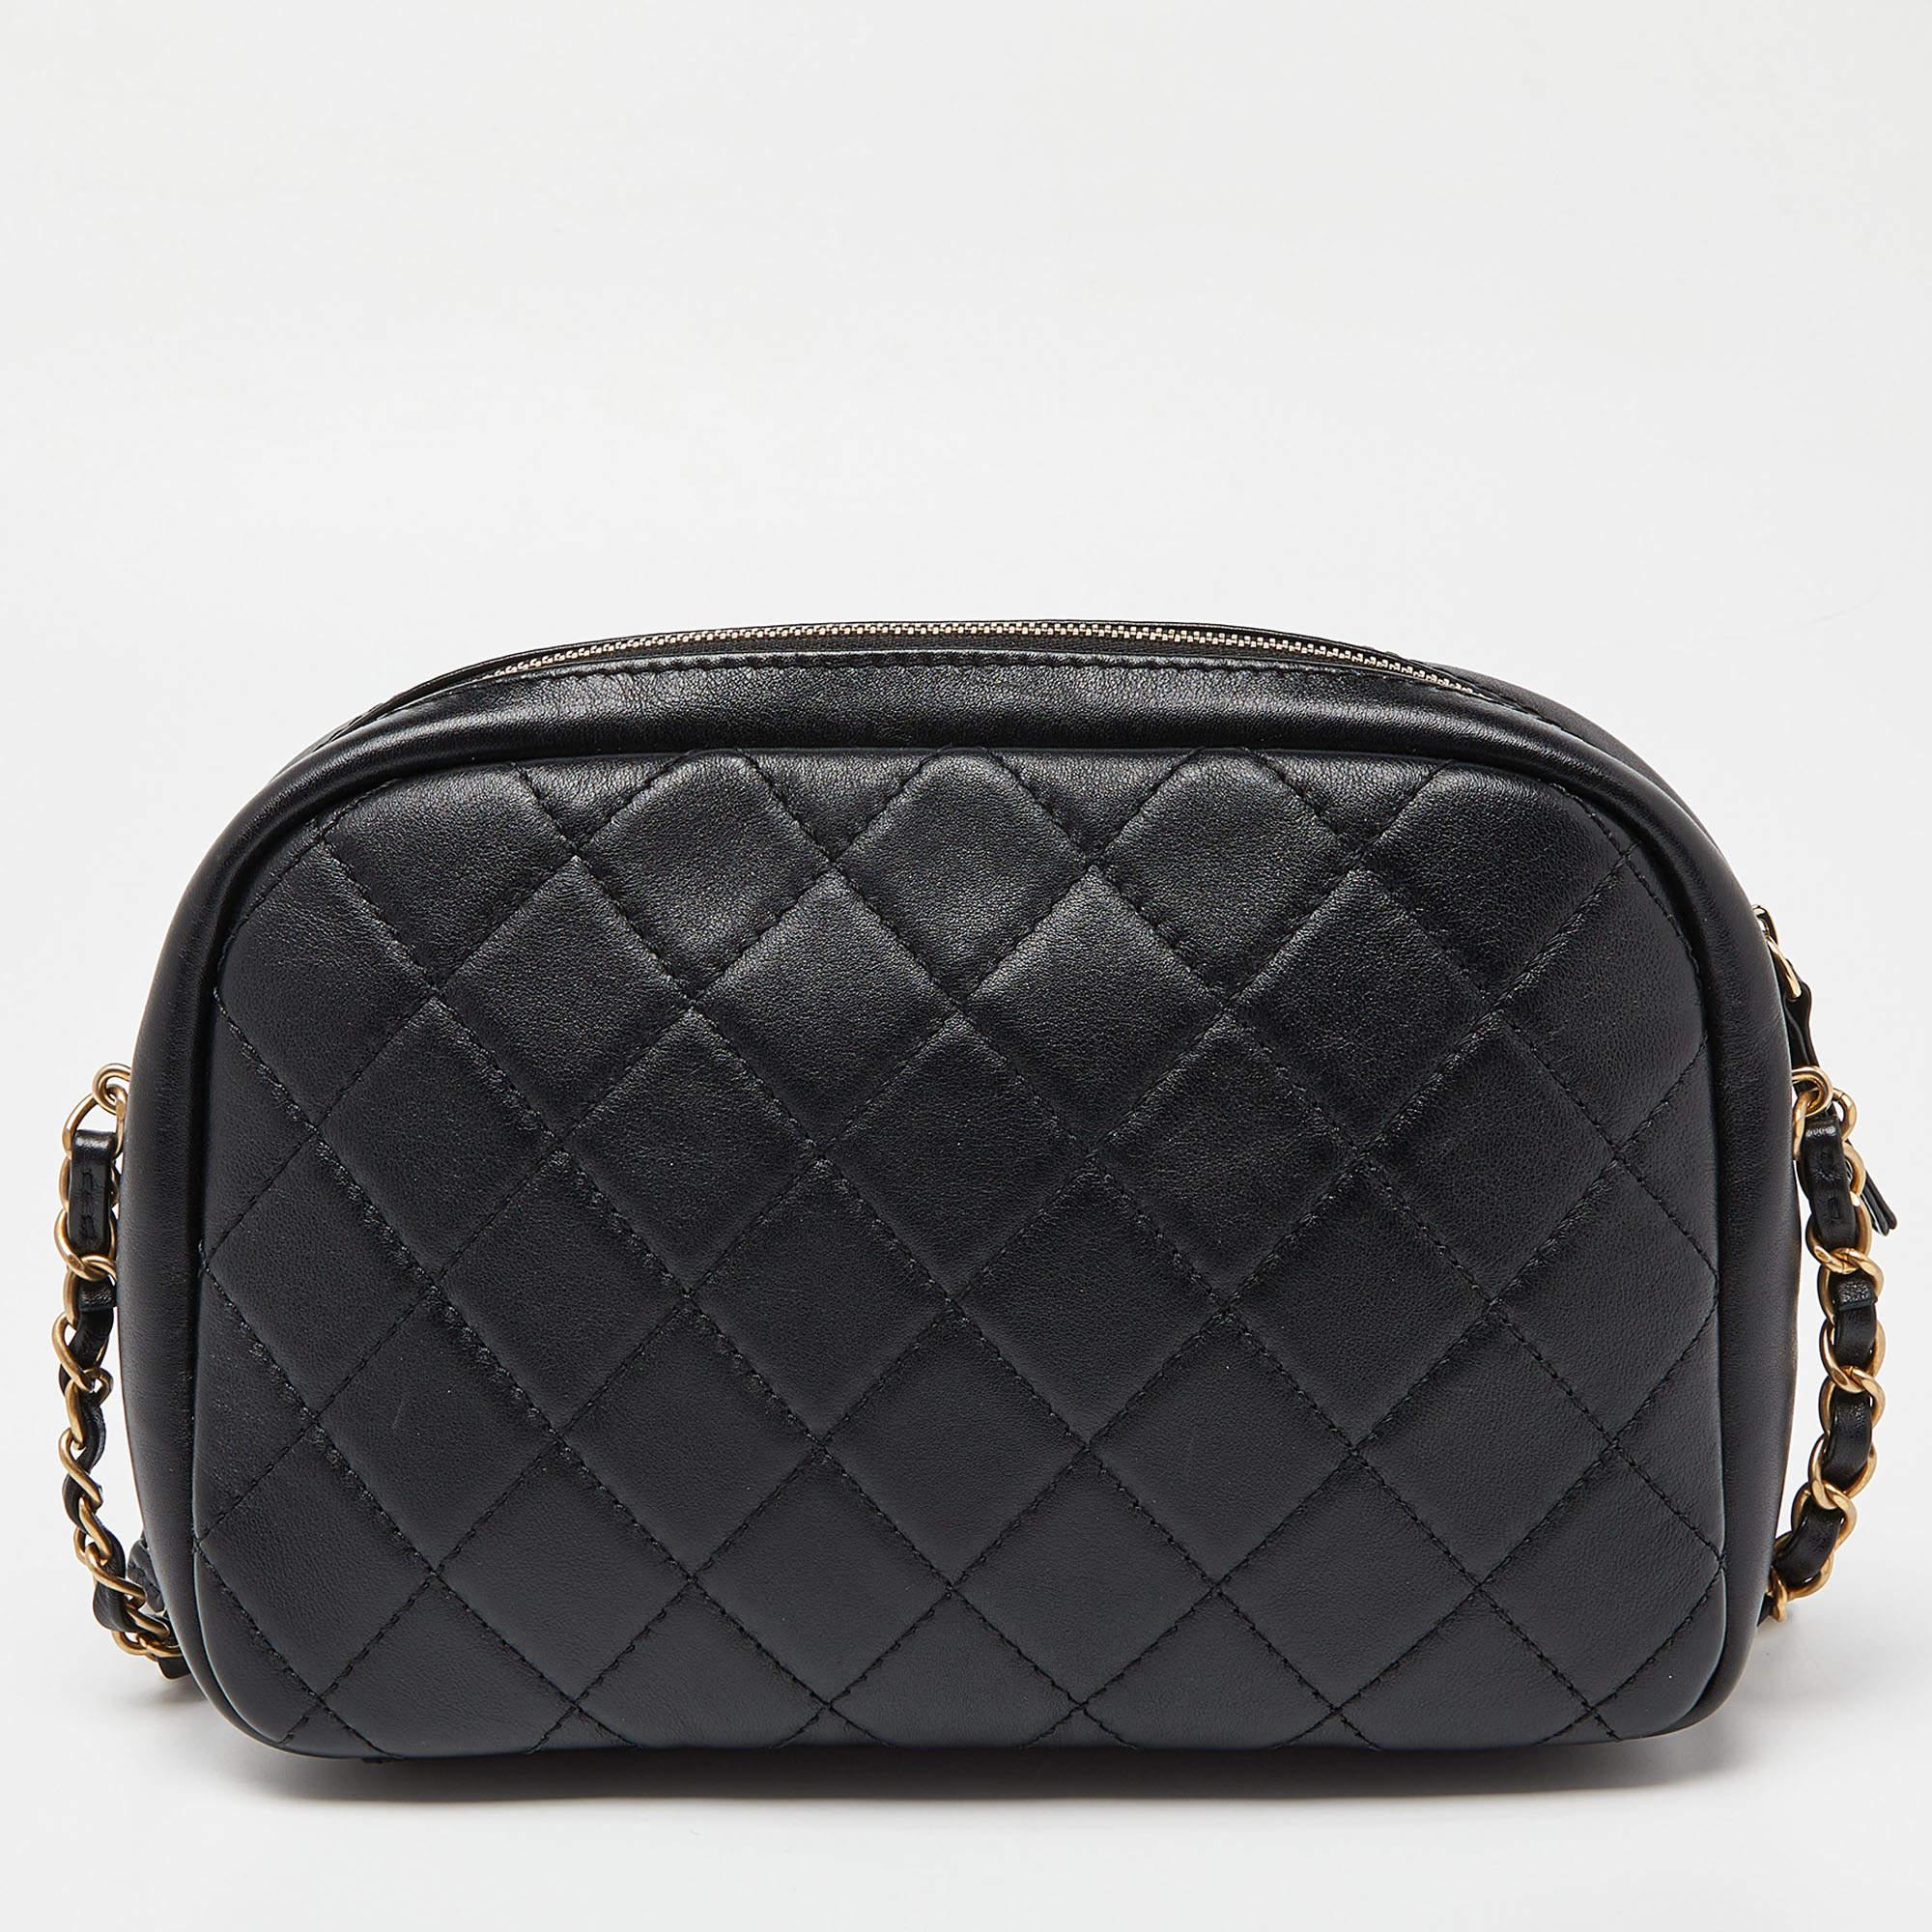 Chanel Black Quilted Leather Buckle Camera Case Bag 7